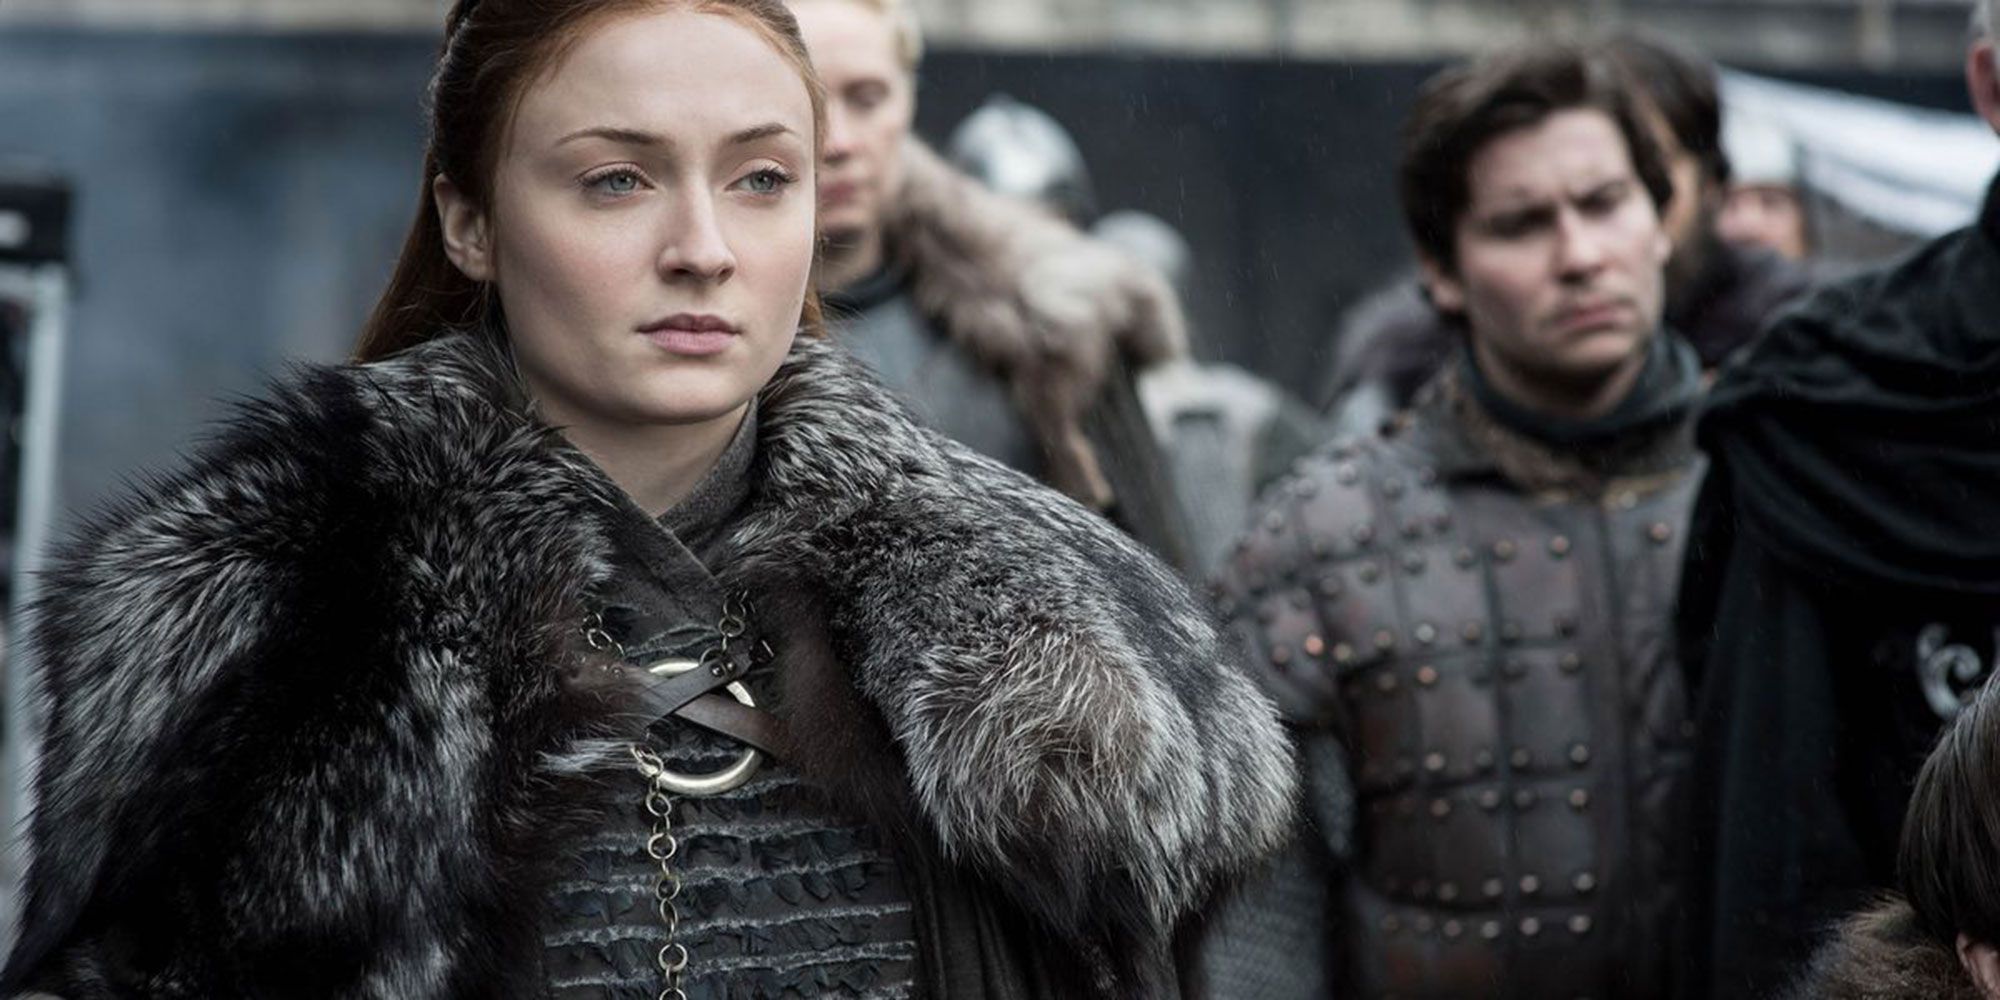 Everyone’s a Combo of a Marvel, Star Wars and Game of Thrones Character — Who Are You? Sansa Stark